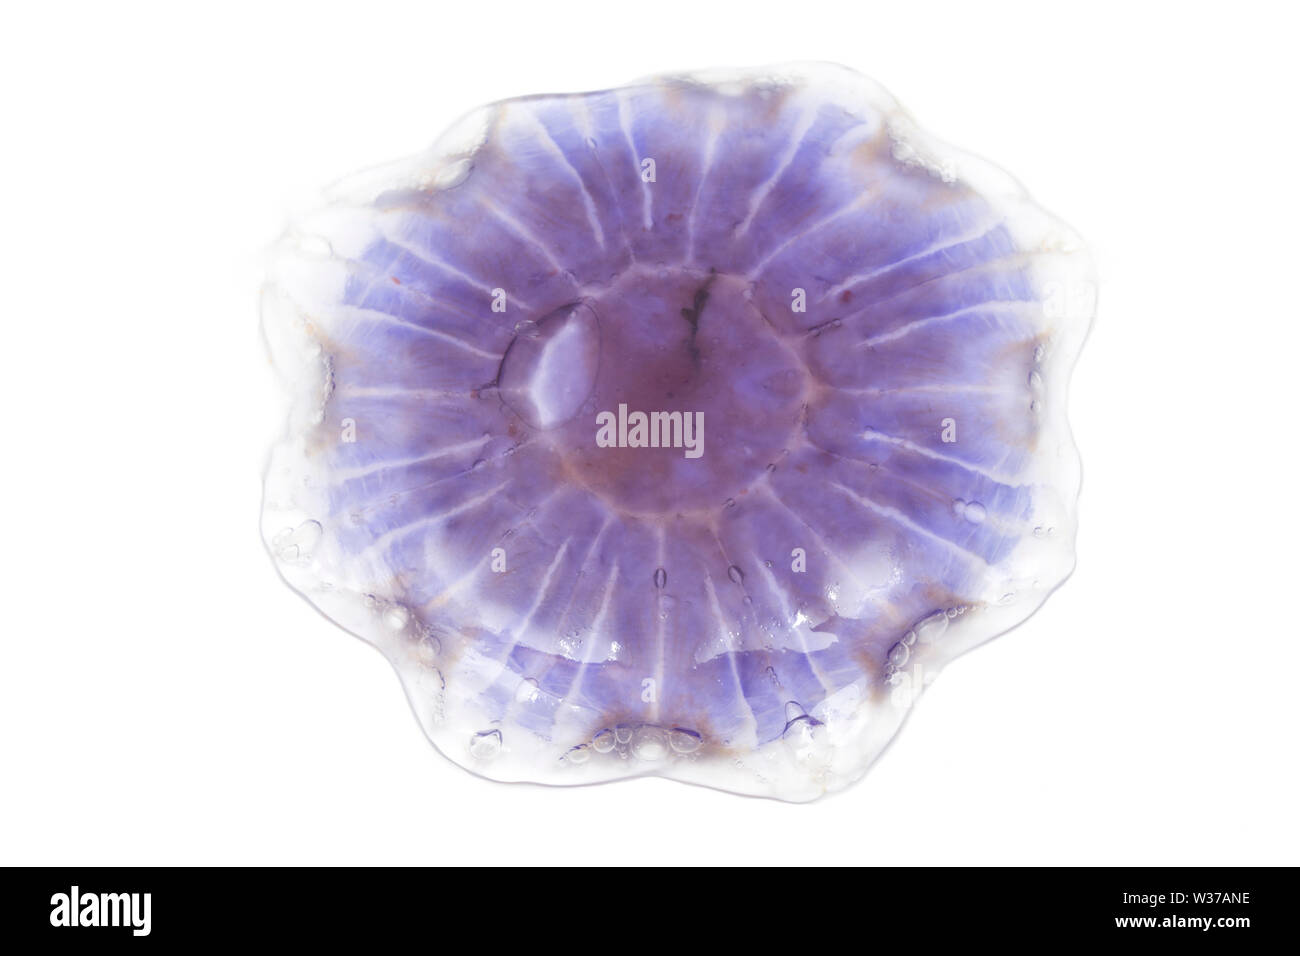 A Blue Jellyfish, Cyanea lamarckii, found washed up on Chesil beach in Dorset and photographed on a white background. Dorset England UK GB Stock Photo